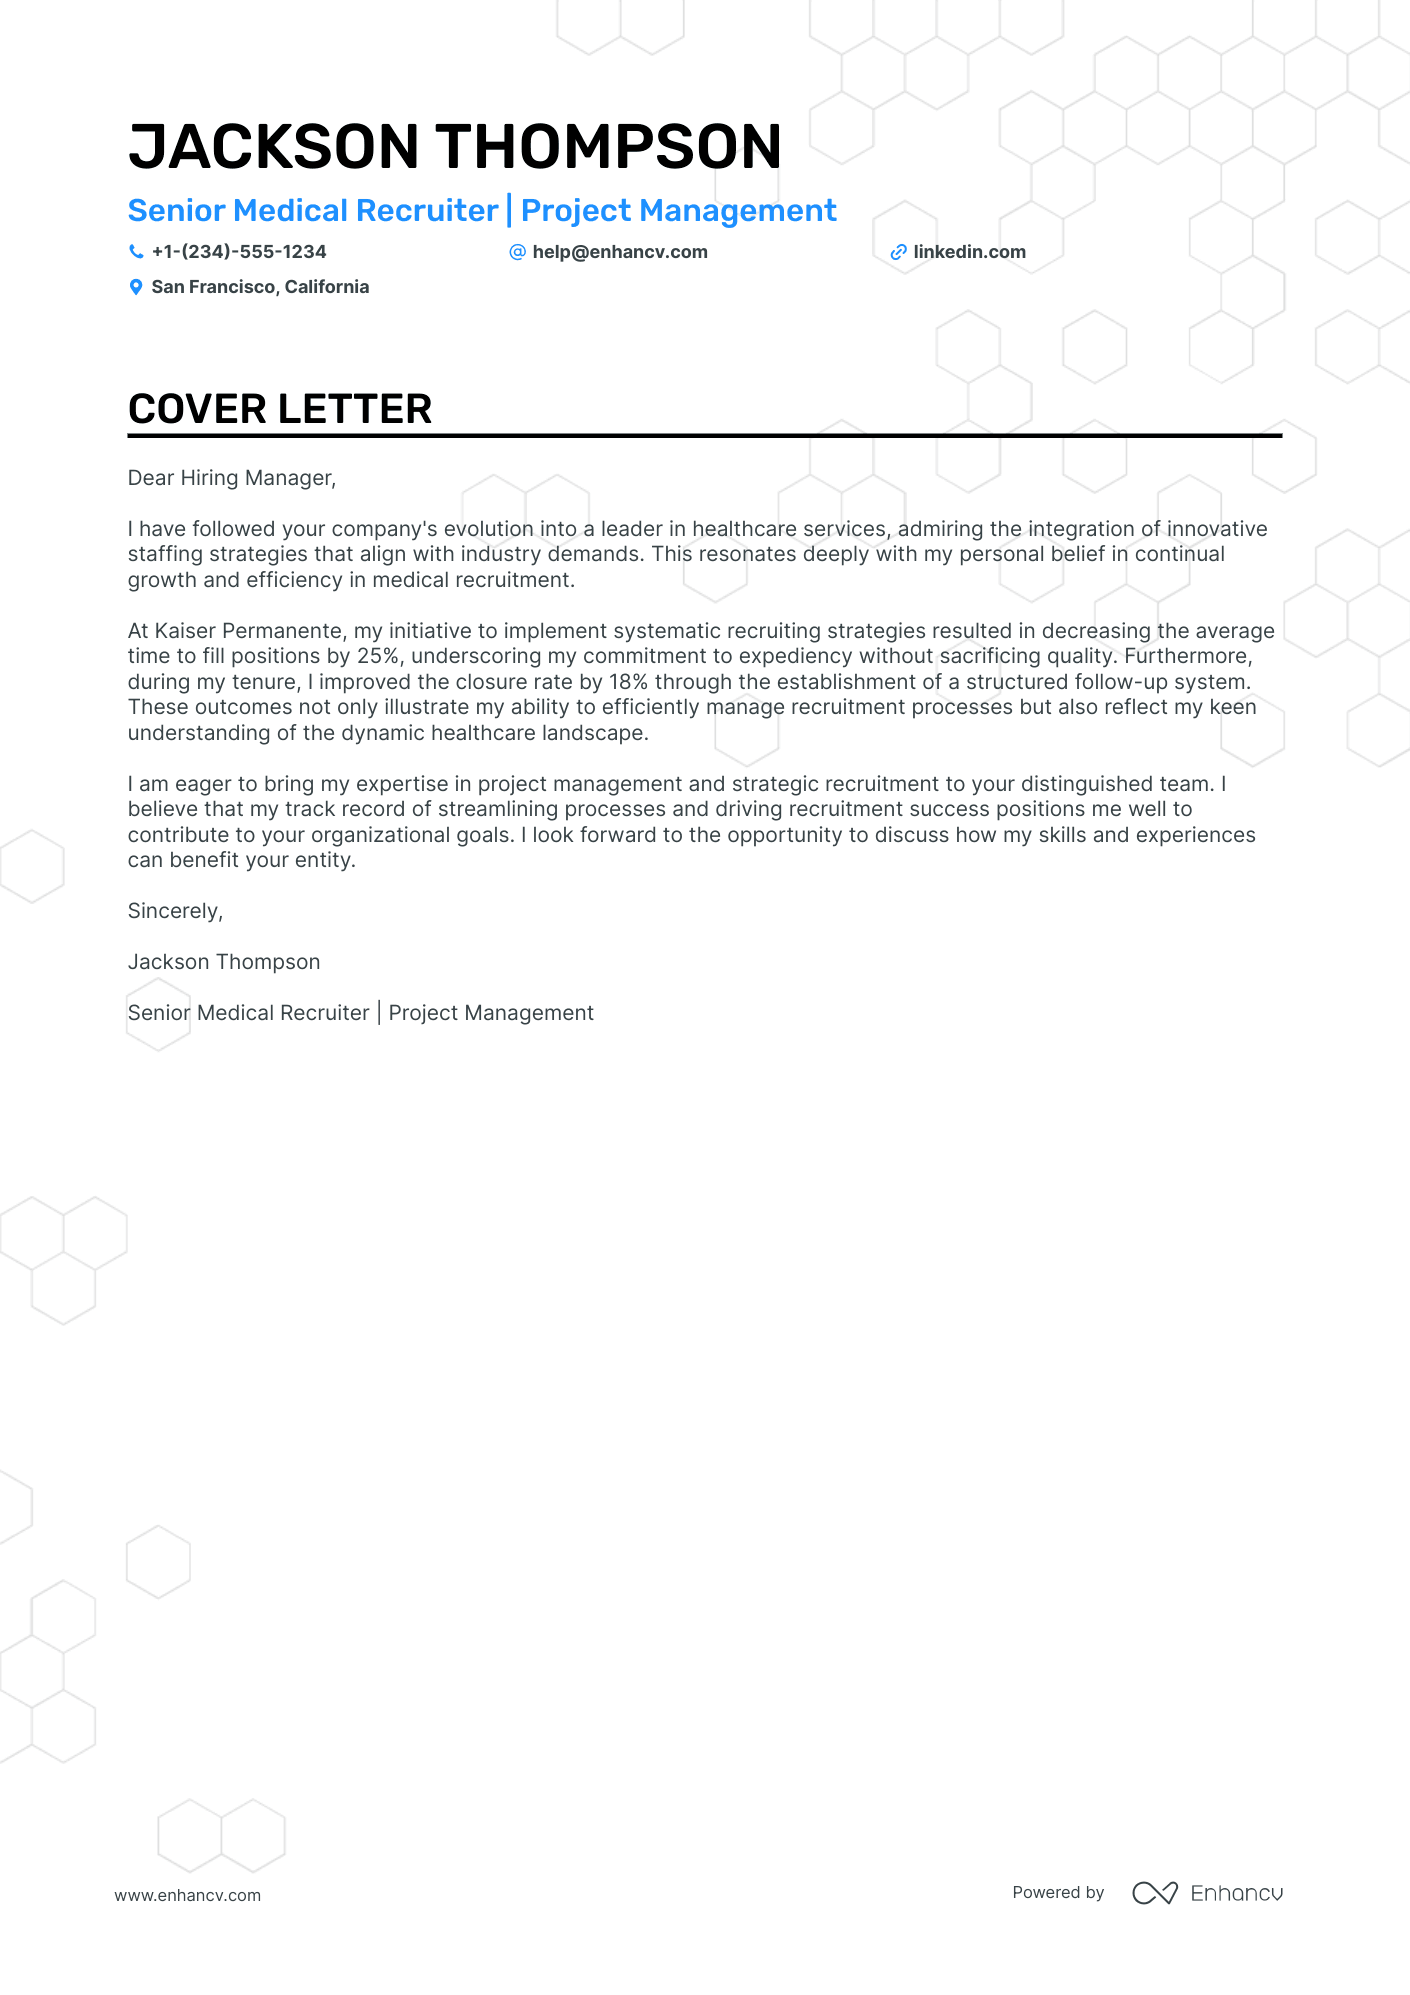 sample cover letter for recruitment role